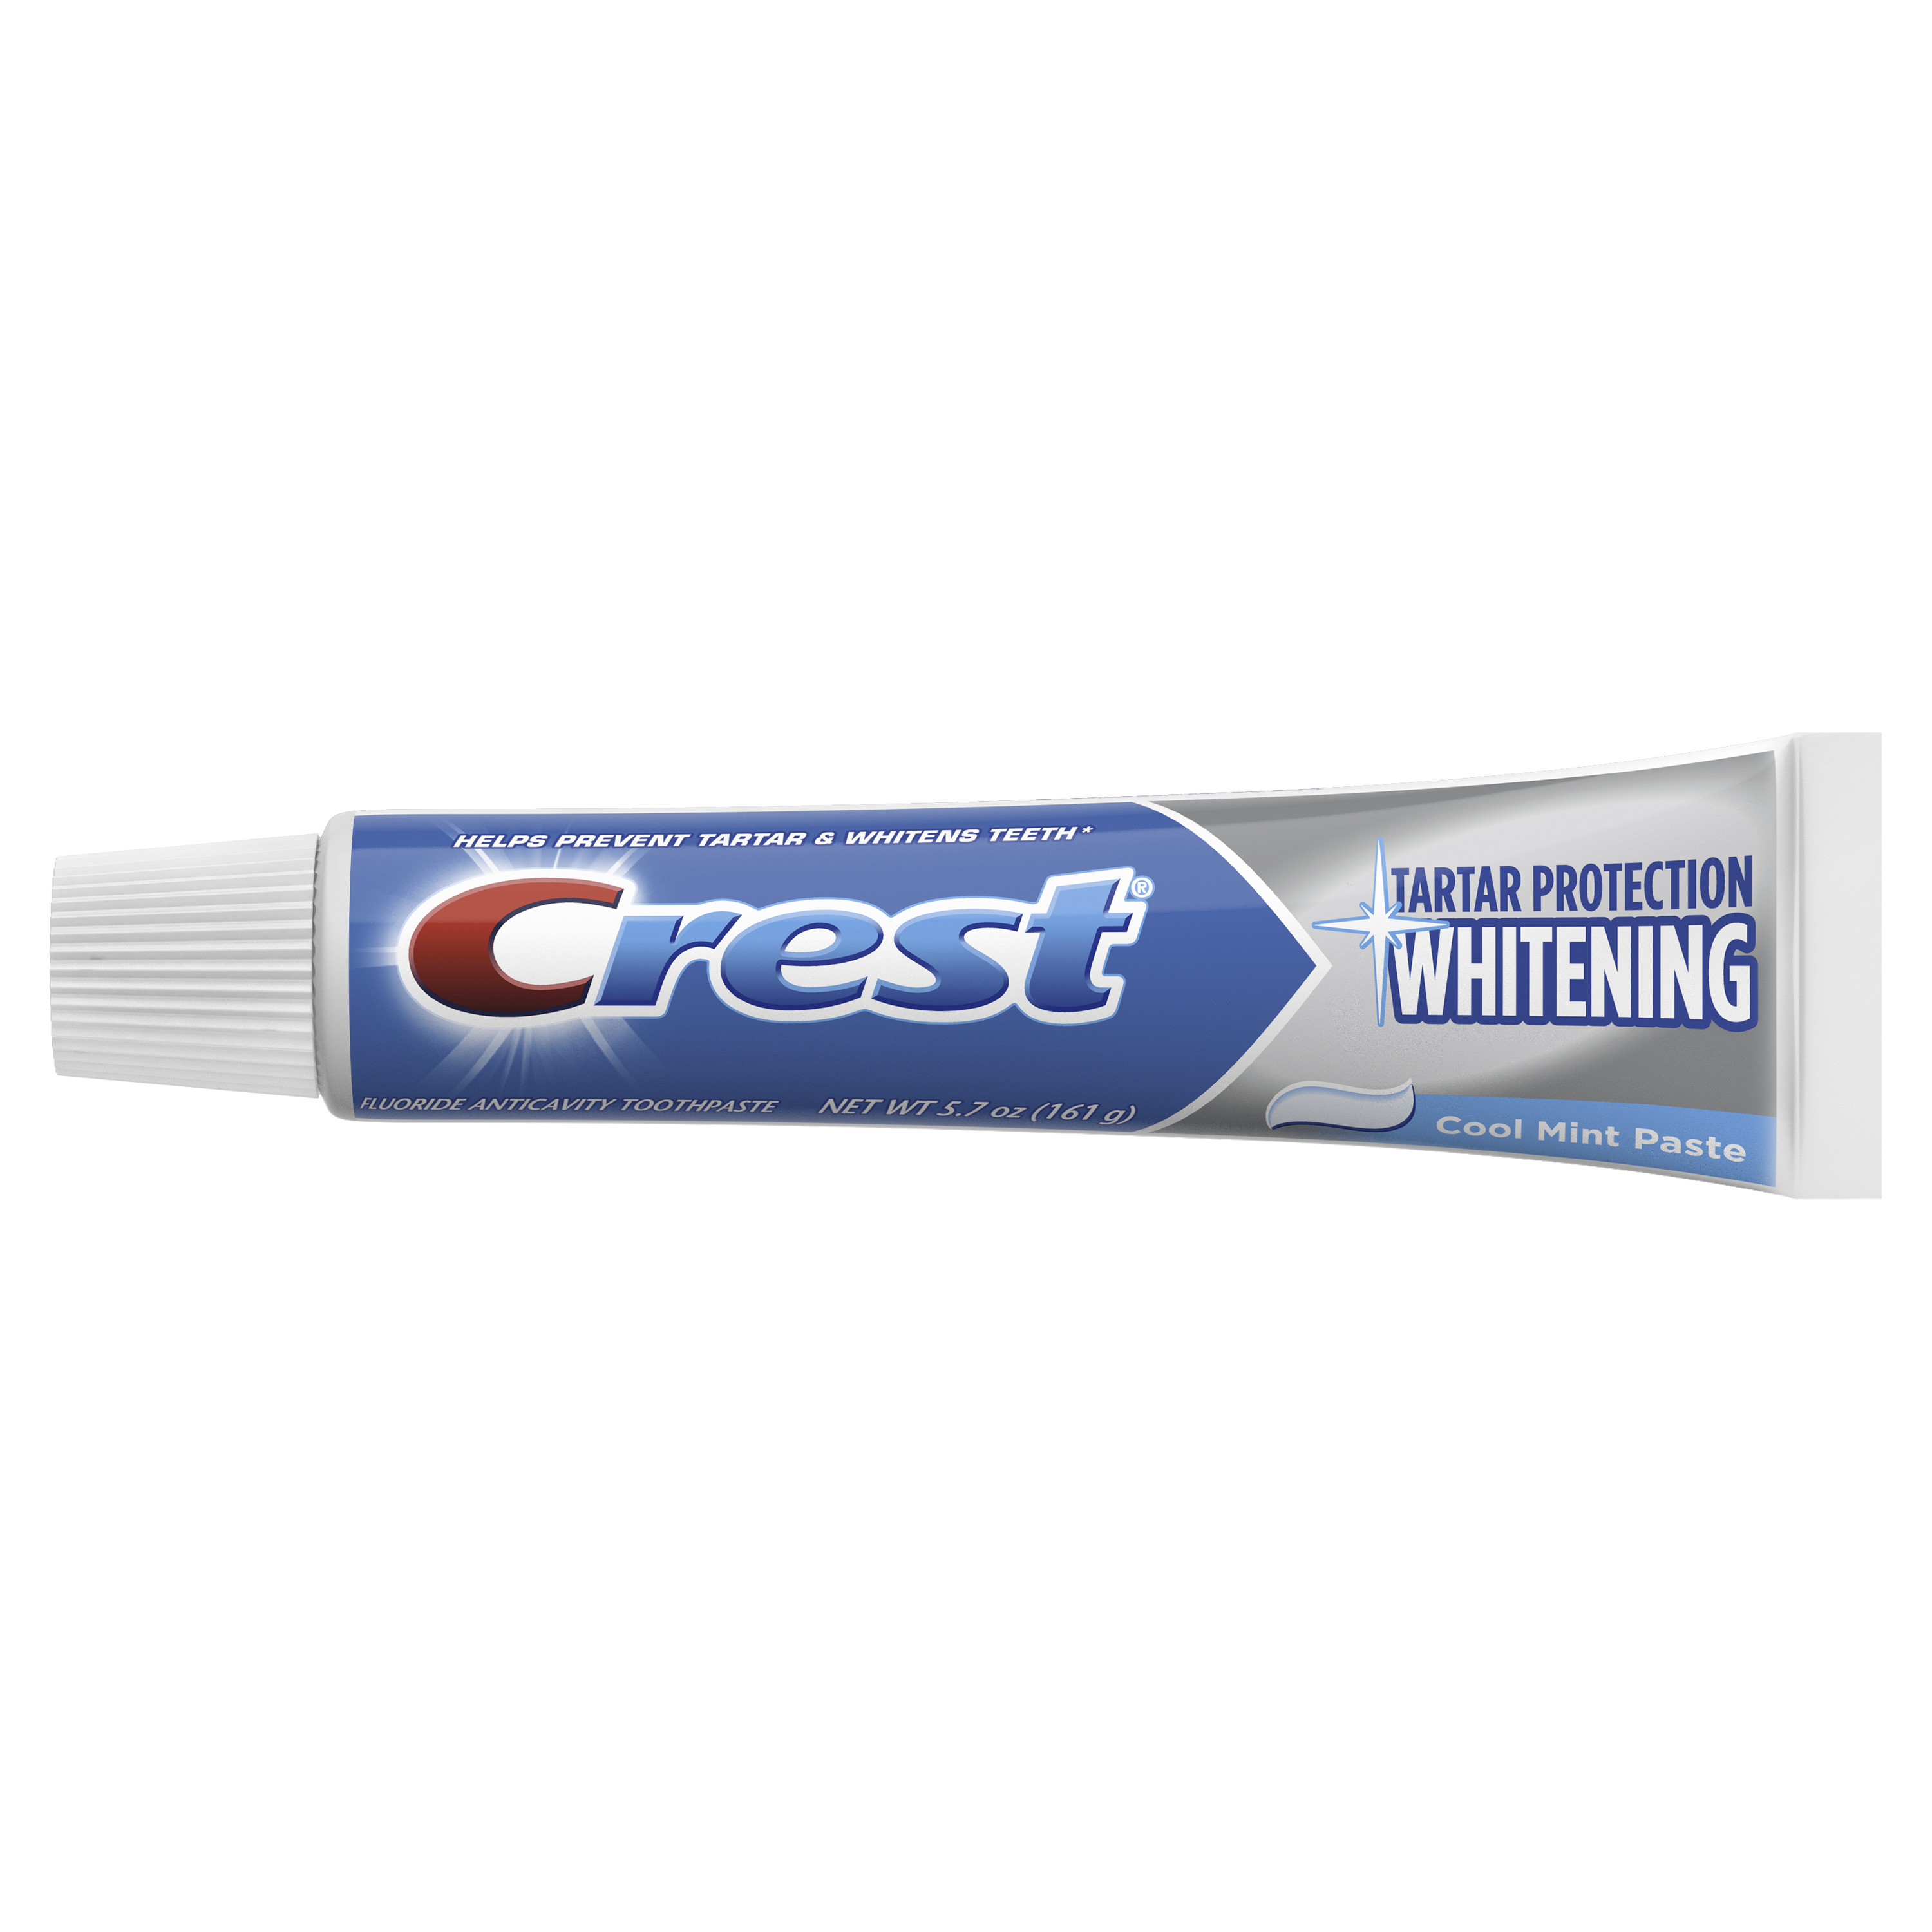 Crest Tartar Protection Toothpaste, Whitening Cool Mint, 5.7 oz - image 4 of 6